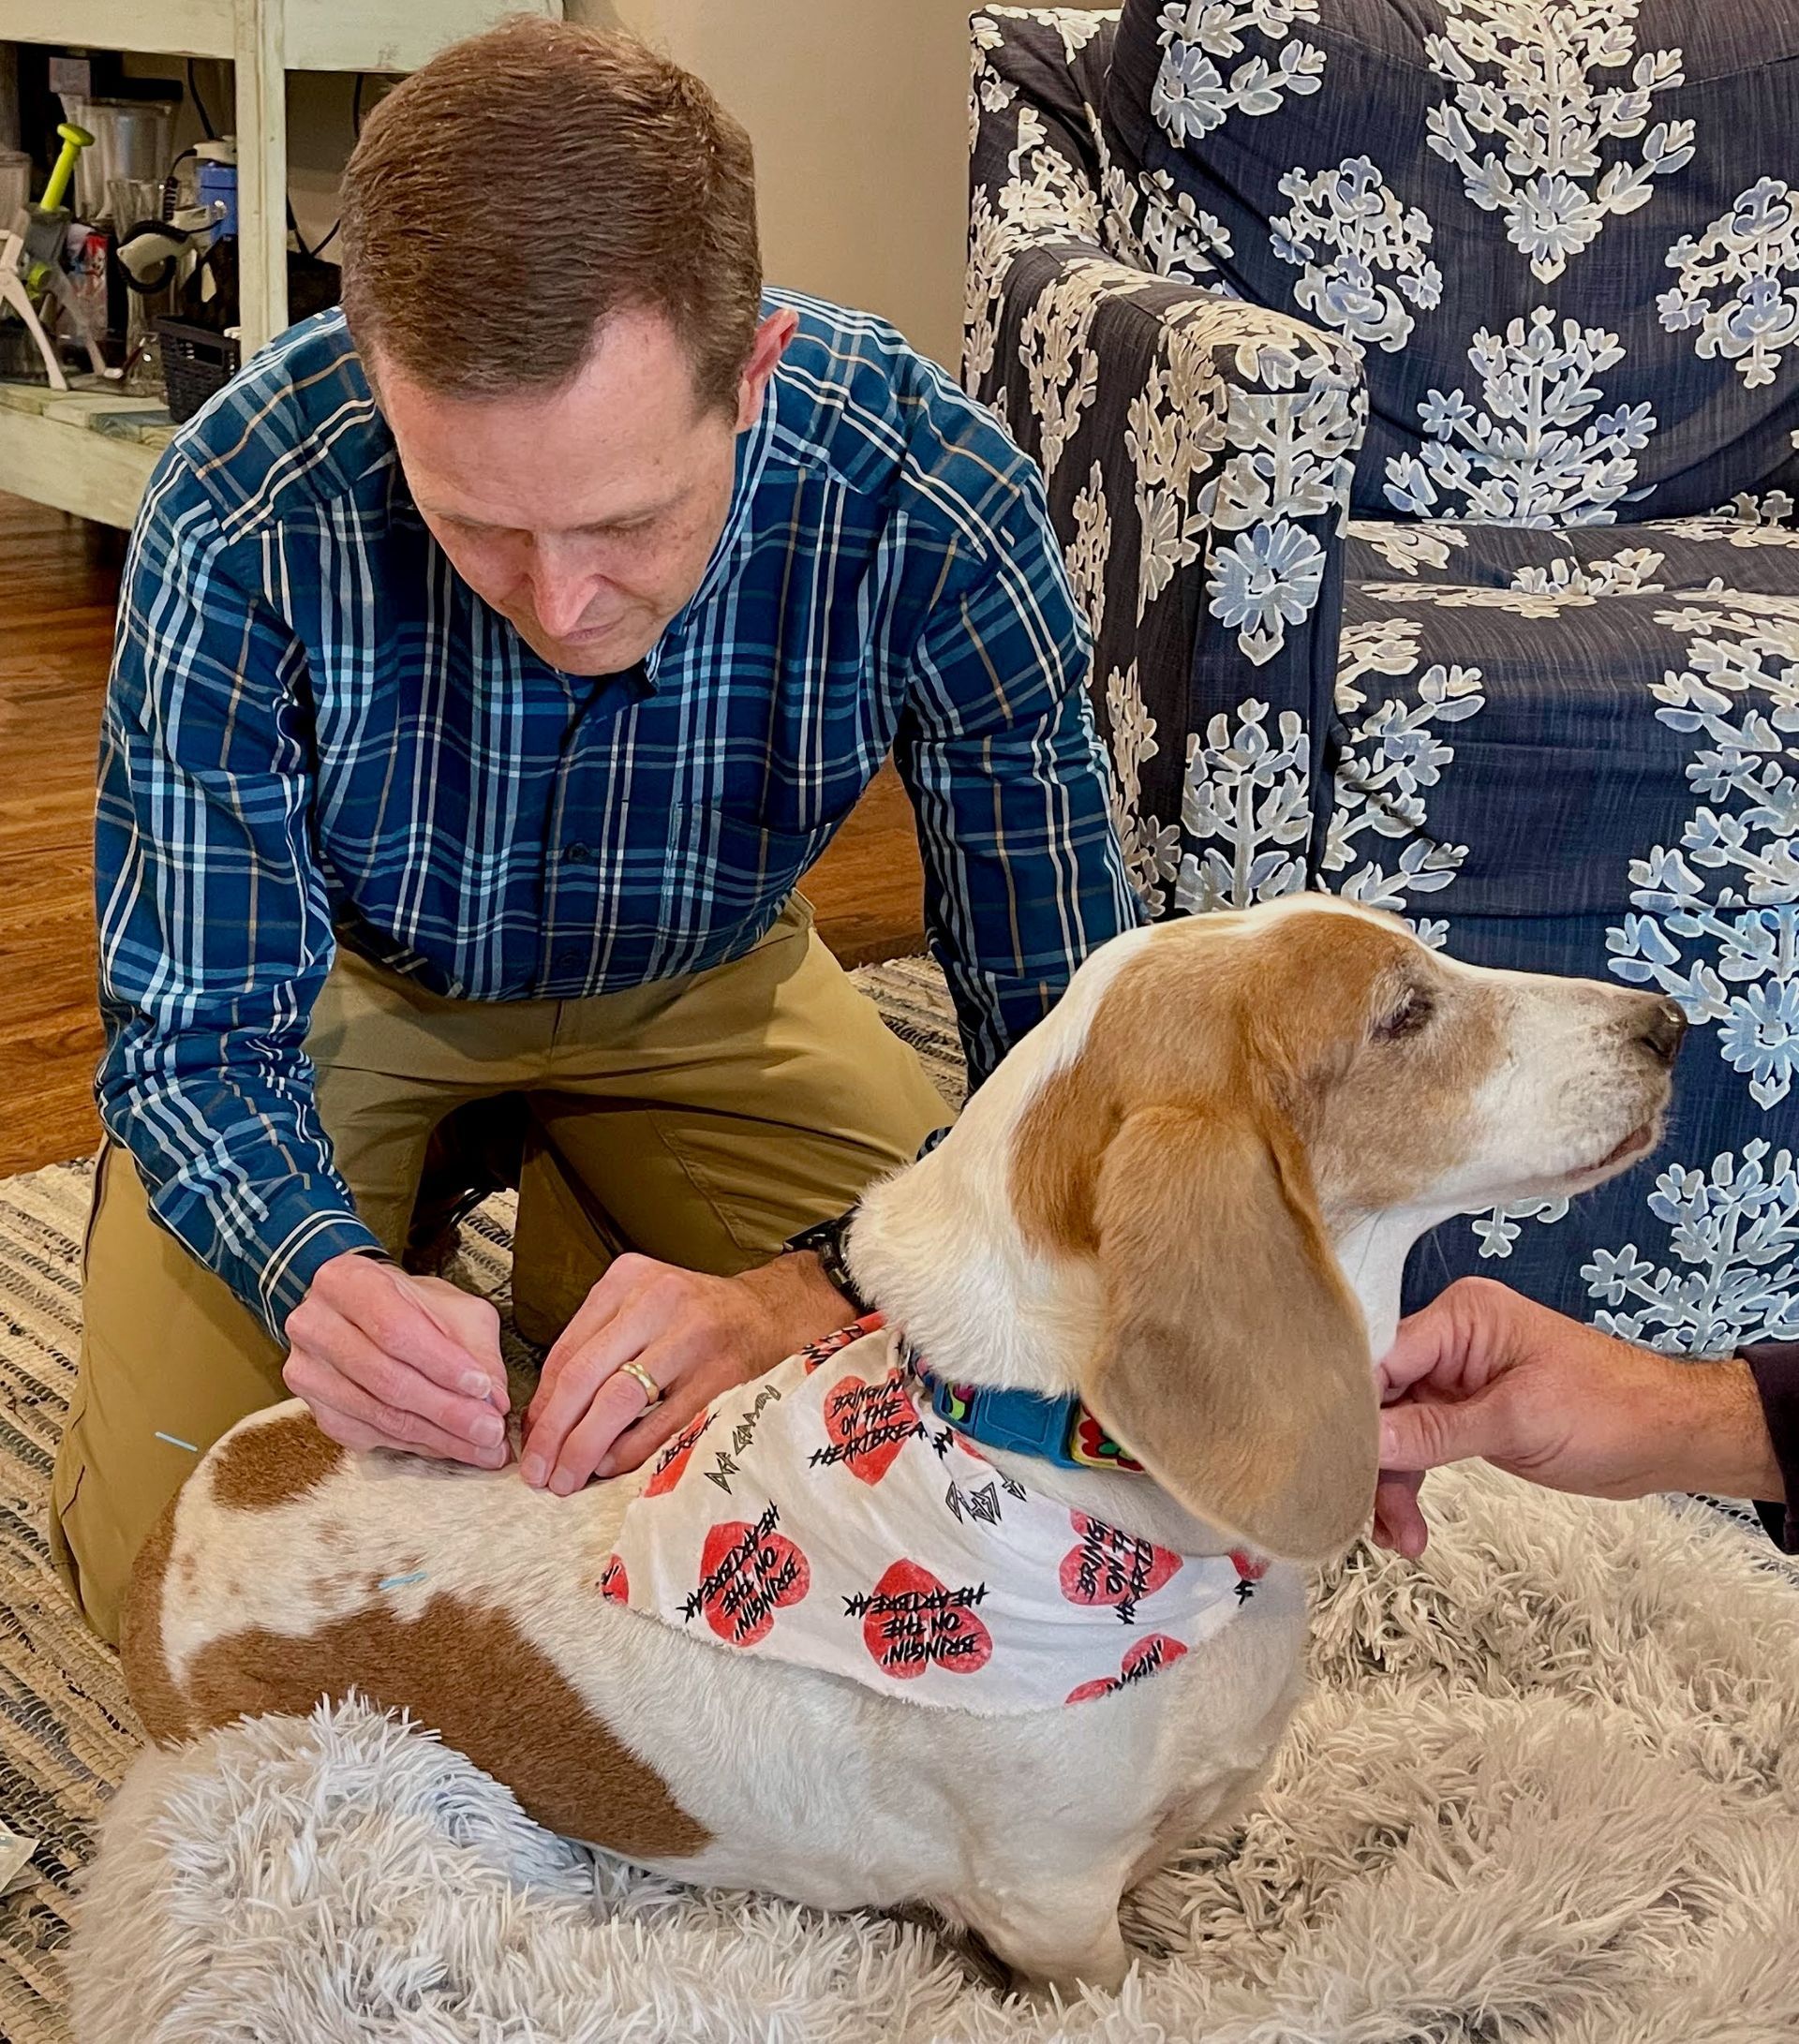 White Basset Hound with brown spots and a heart handkerchief sitting on a dog bed while male veterinarian puts acupuncture needles in her back